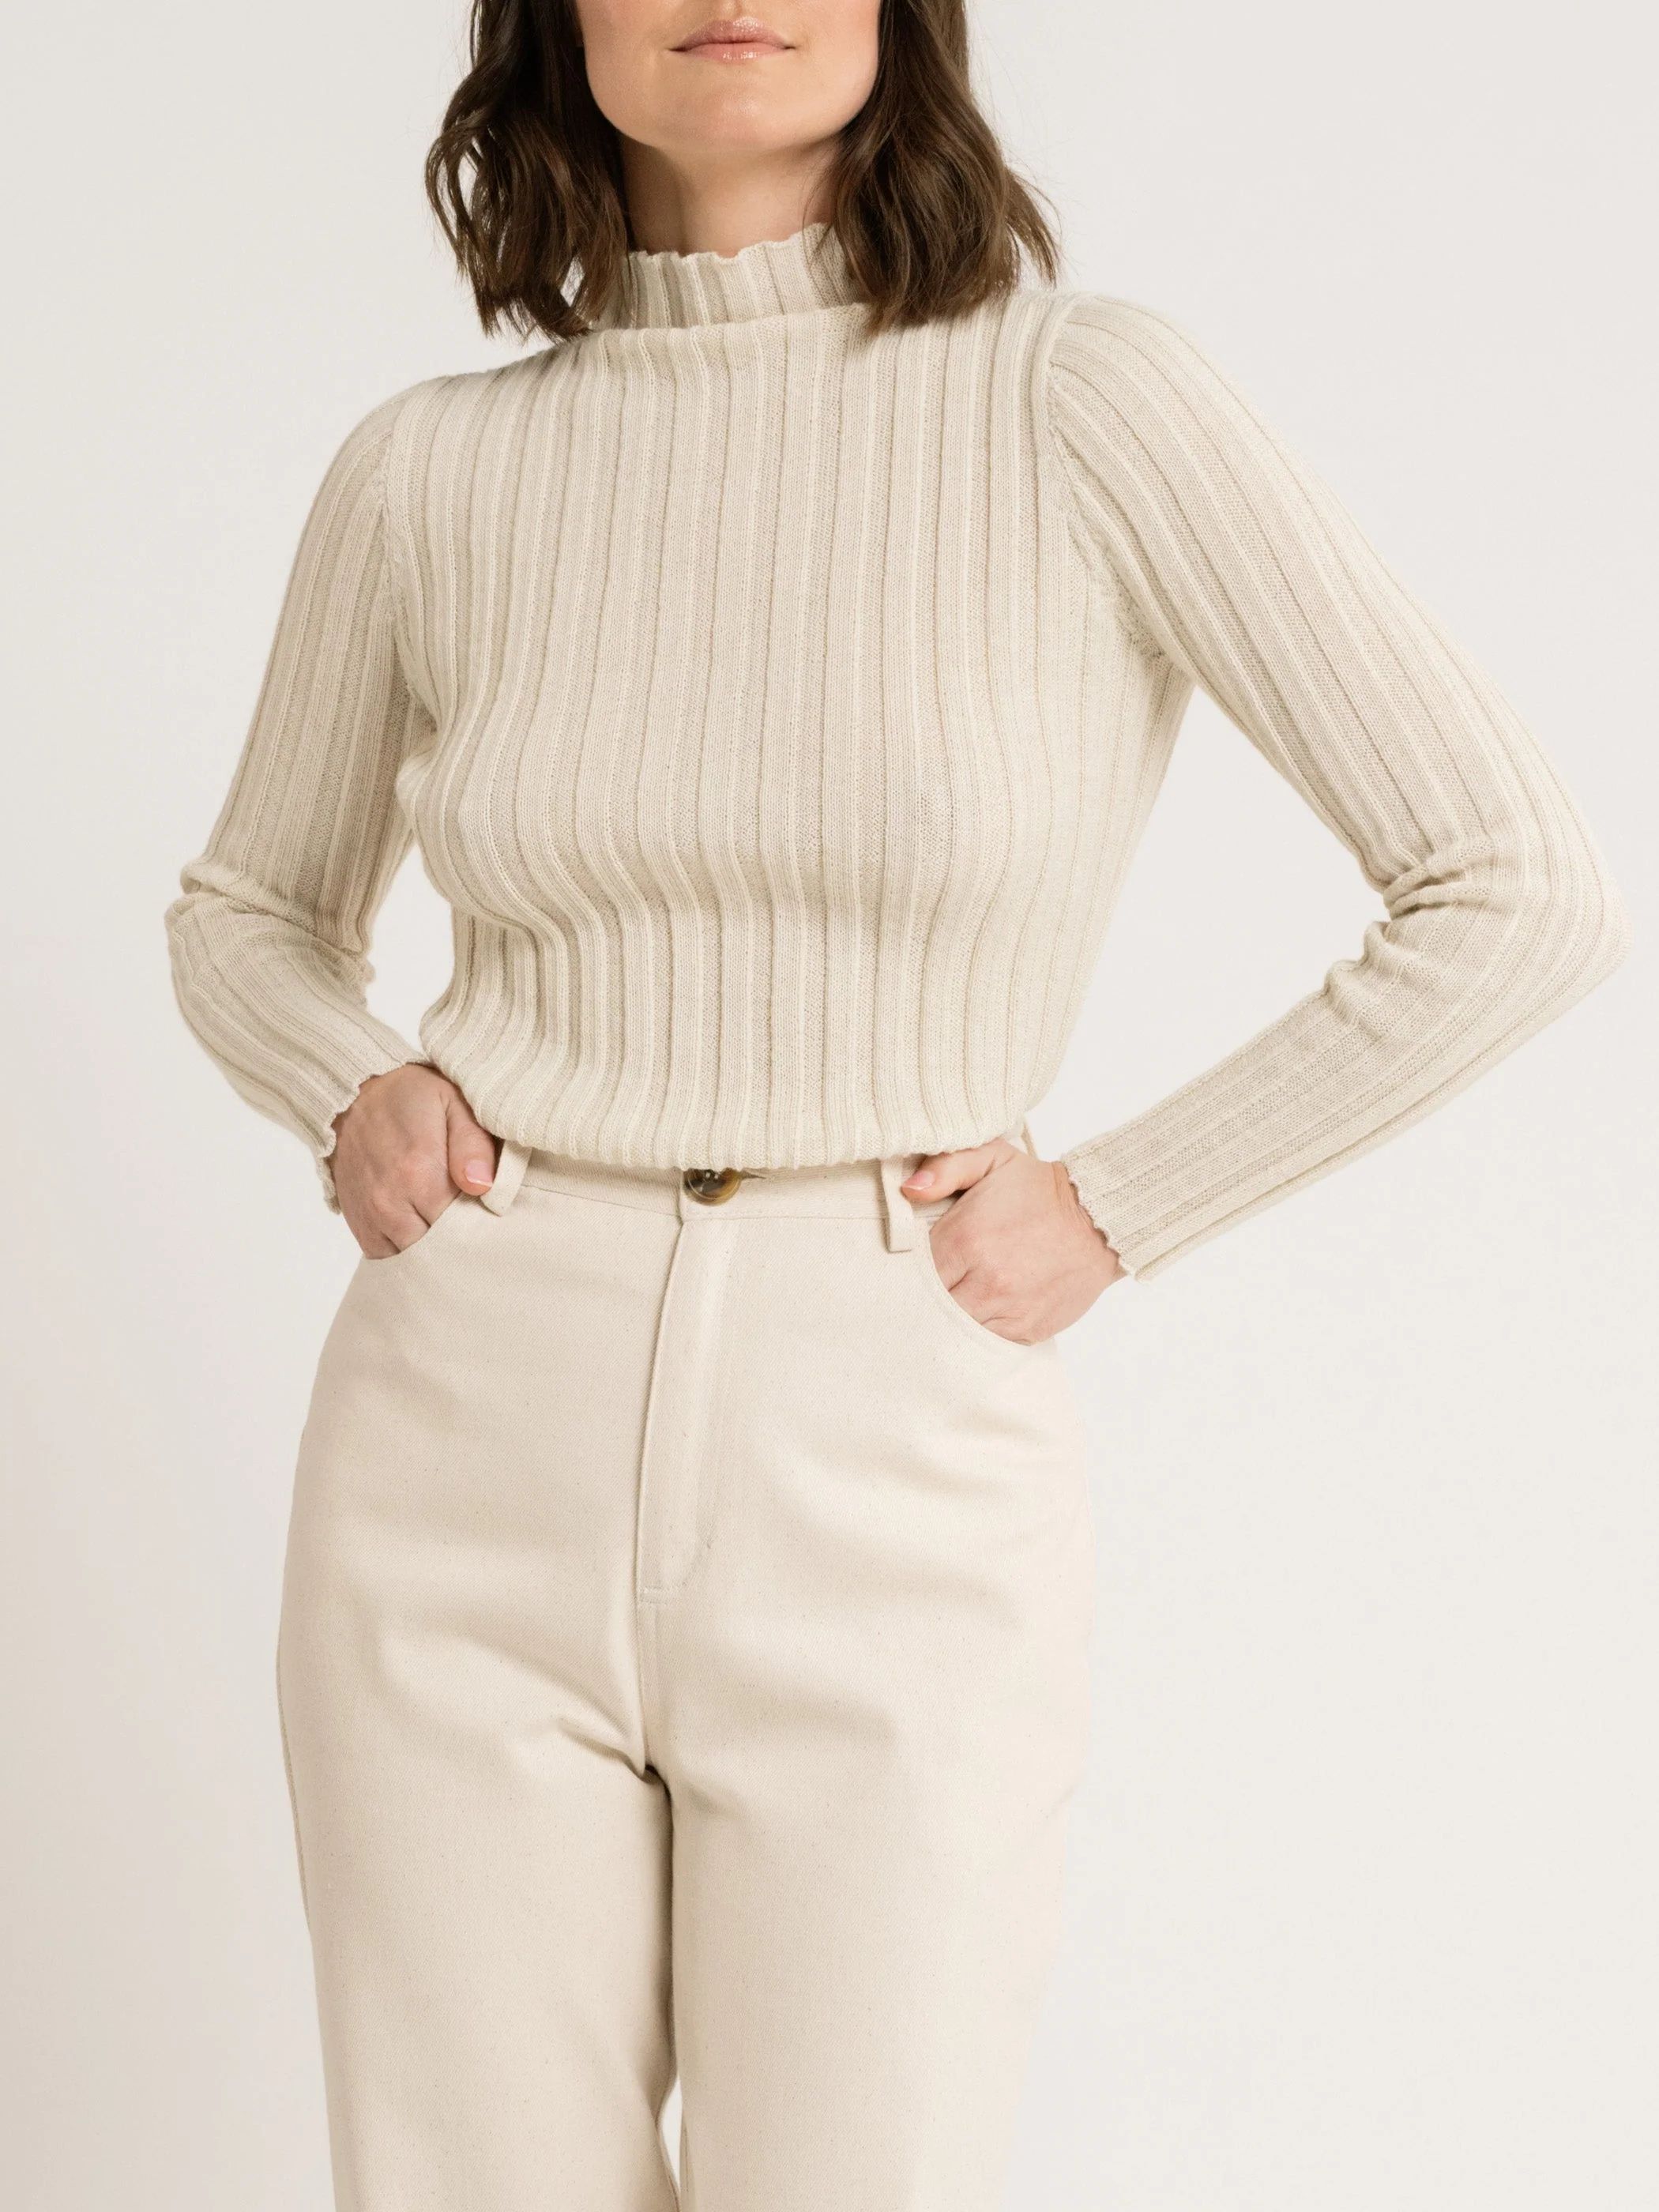 Soa Ribbed Turtleneck - Vanilla by LAUDE the Label | Support HerStory